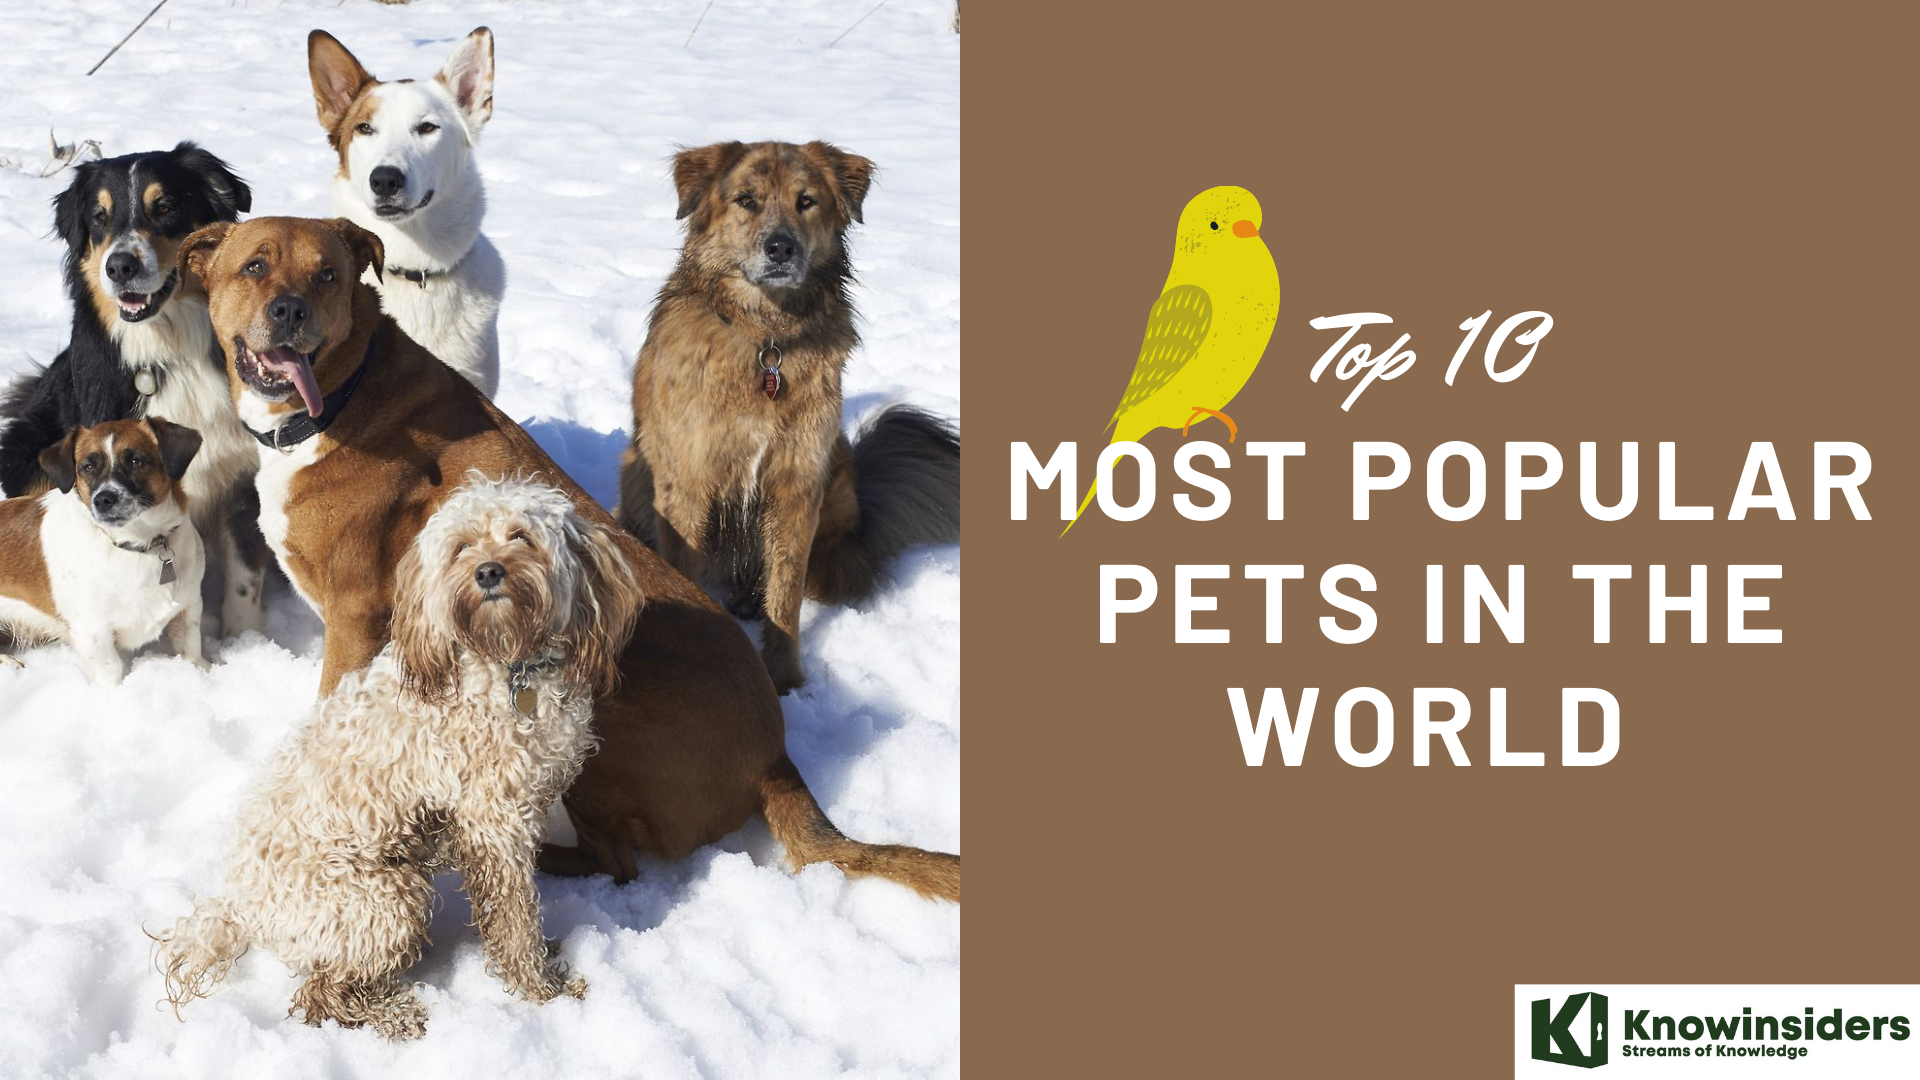 Top 10 most popular pets in the world 